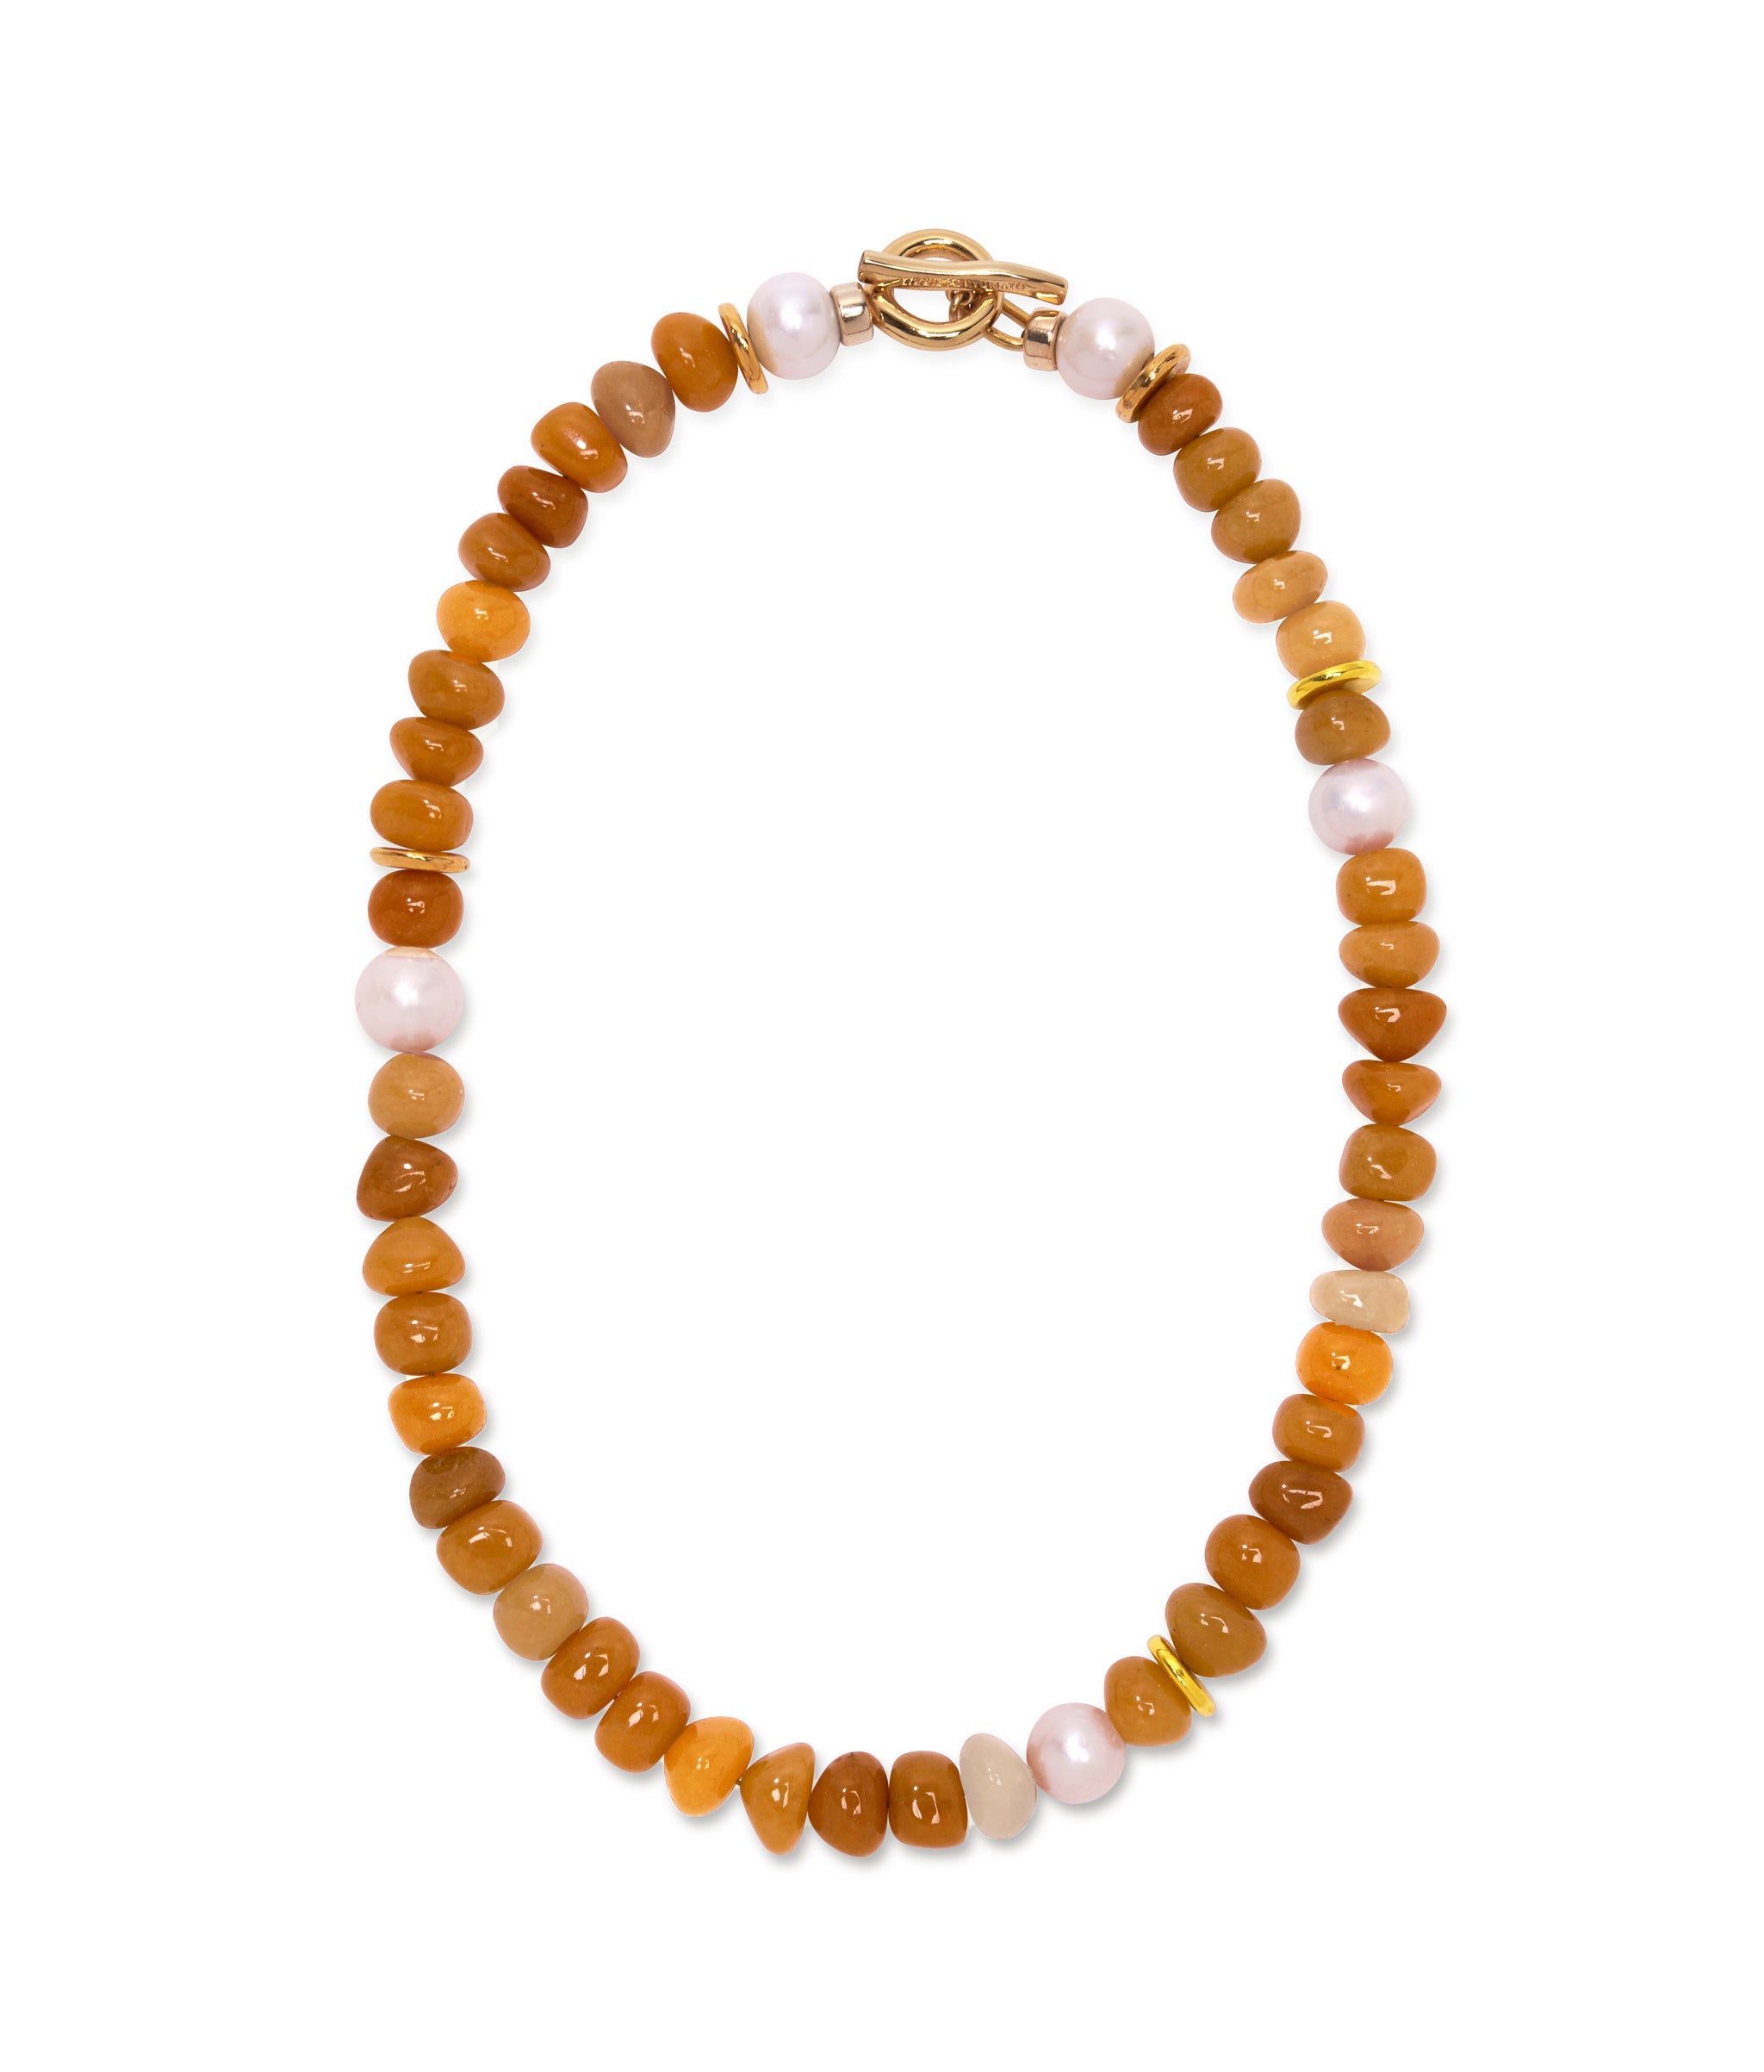 Mood Necklace in Red Aventurine. Red Aventurine necklace with assorted gold plated brass and pearls and toggle closure.